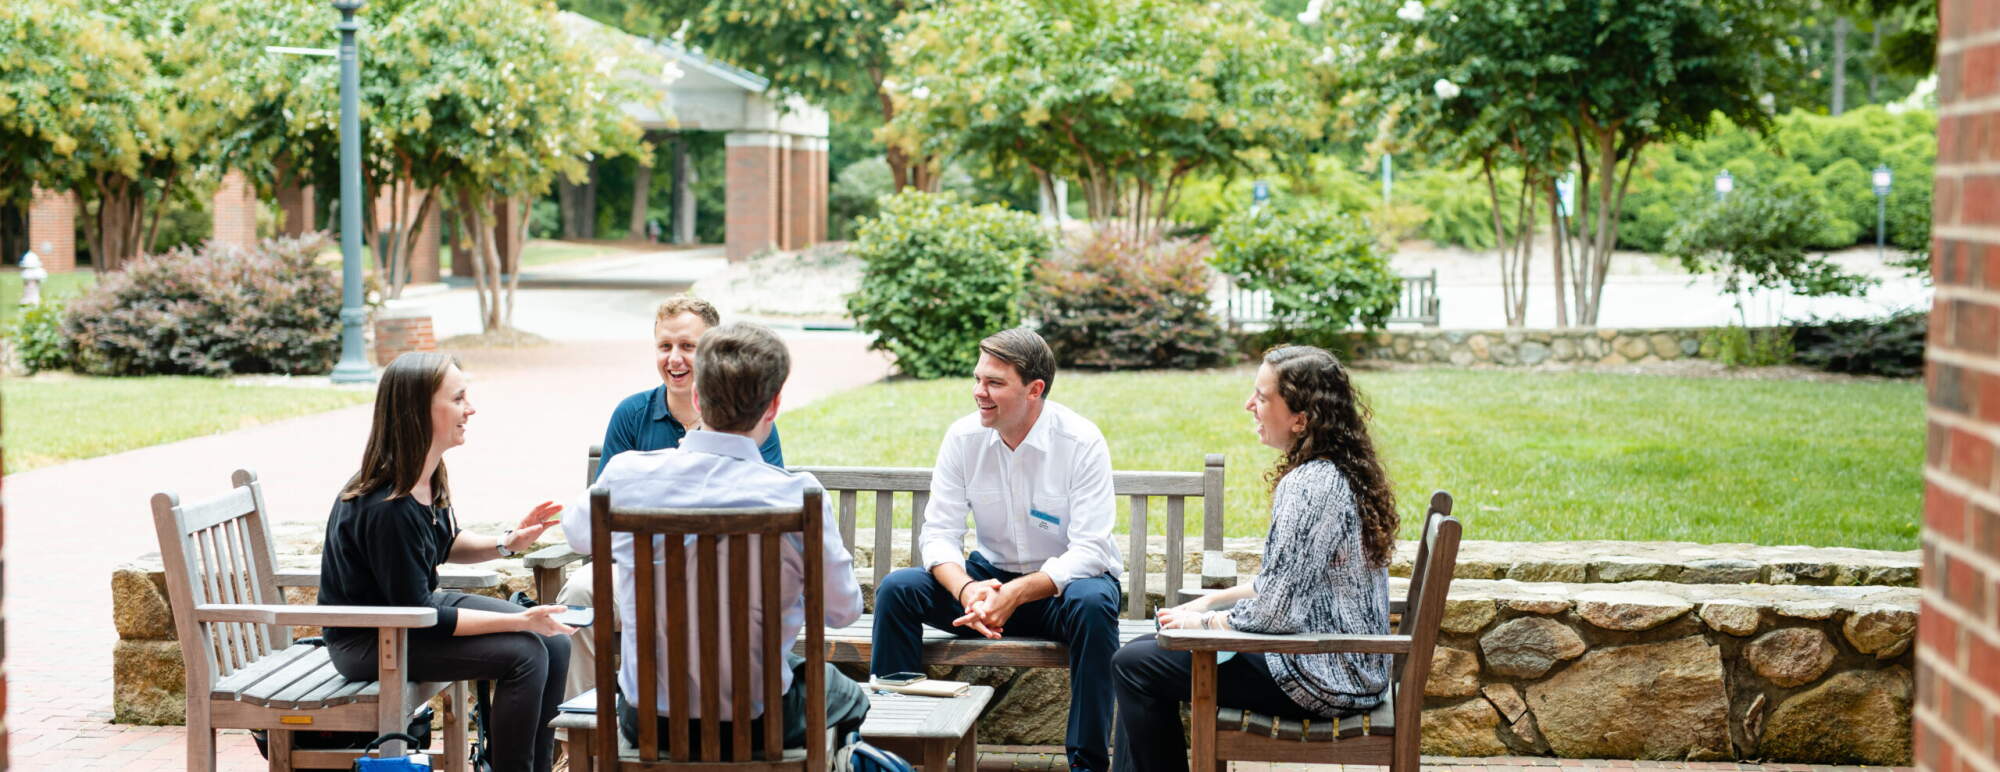 Students sit outside talking to each other. They are surrounded by green trees and lush landscape. The students are sitting on wooden outdoor furniture.